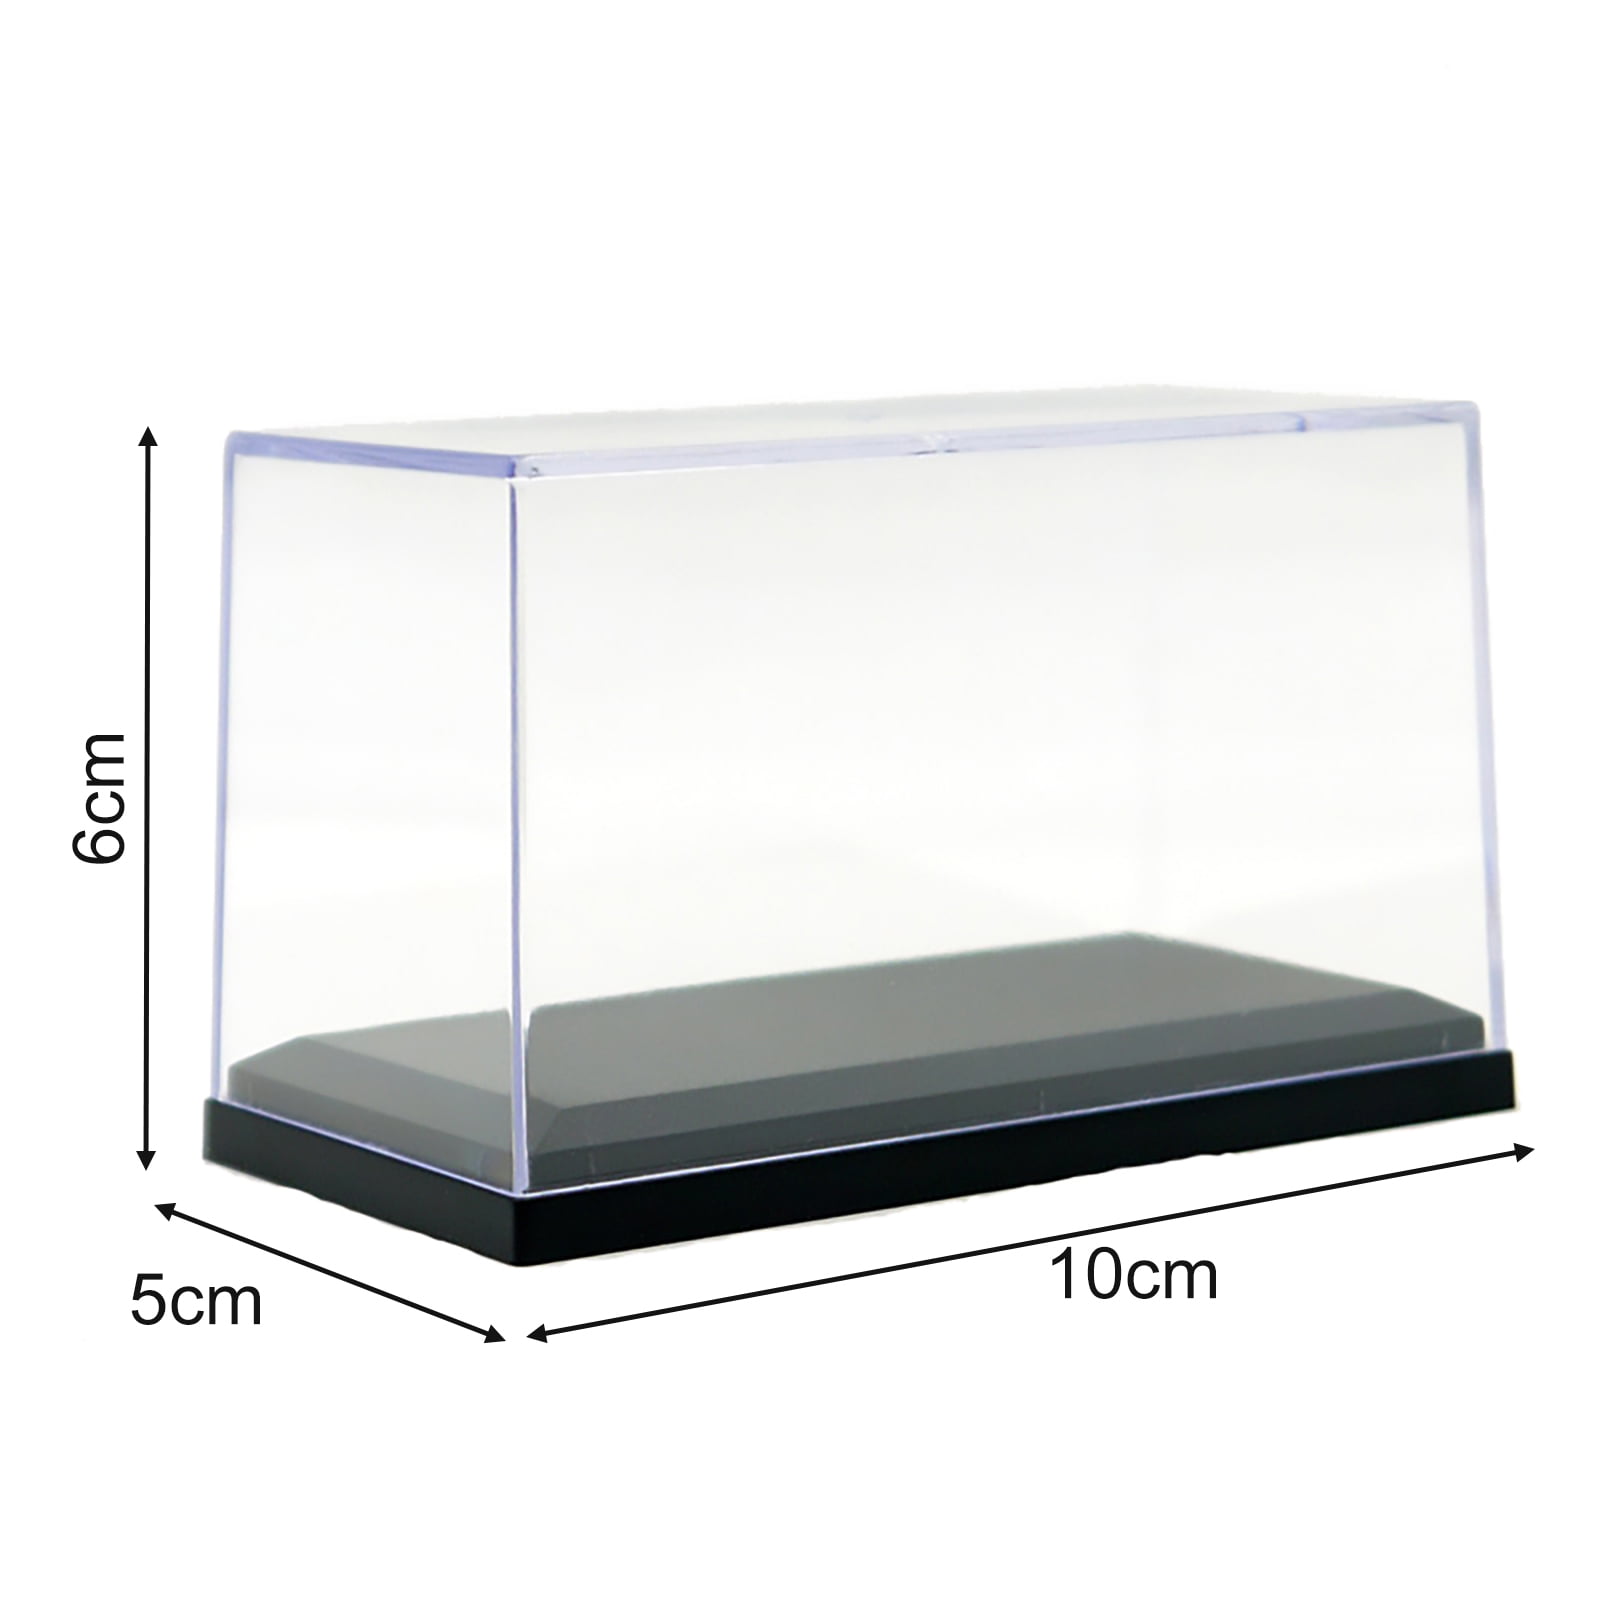 Display Box Acrylic Car Toy Dust-proof For 1:64 Model Make For Quality Material 